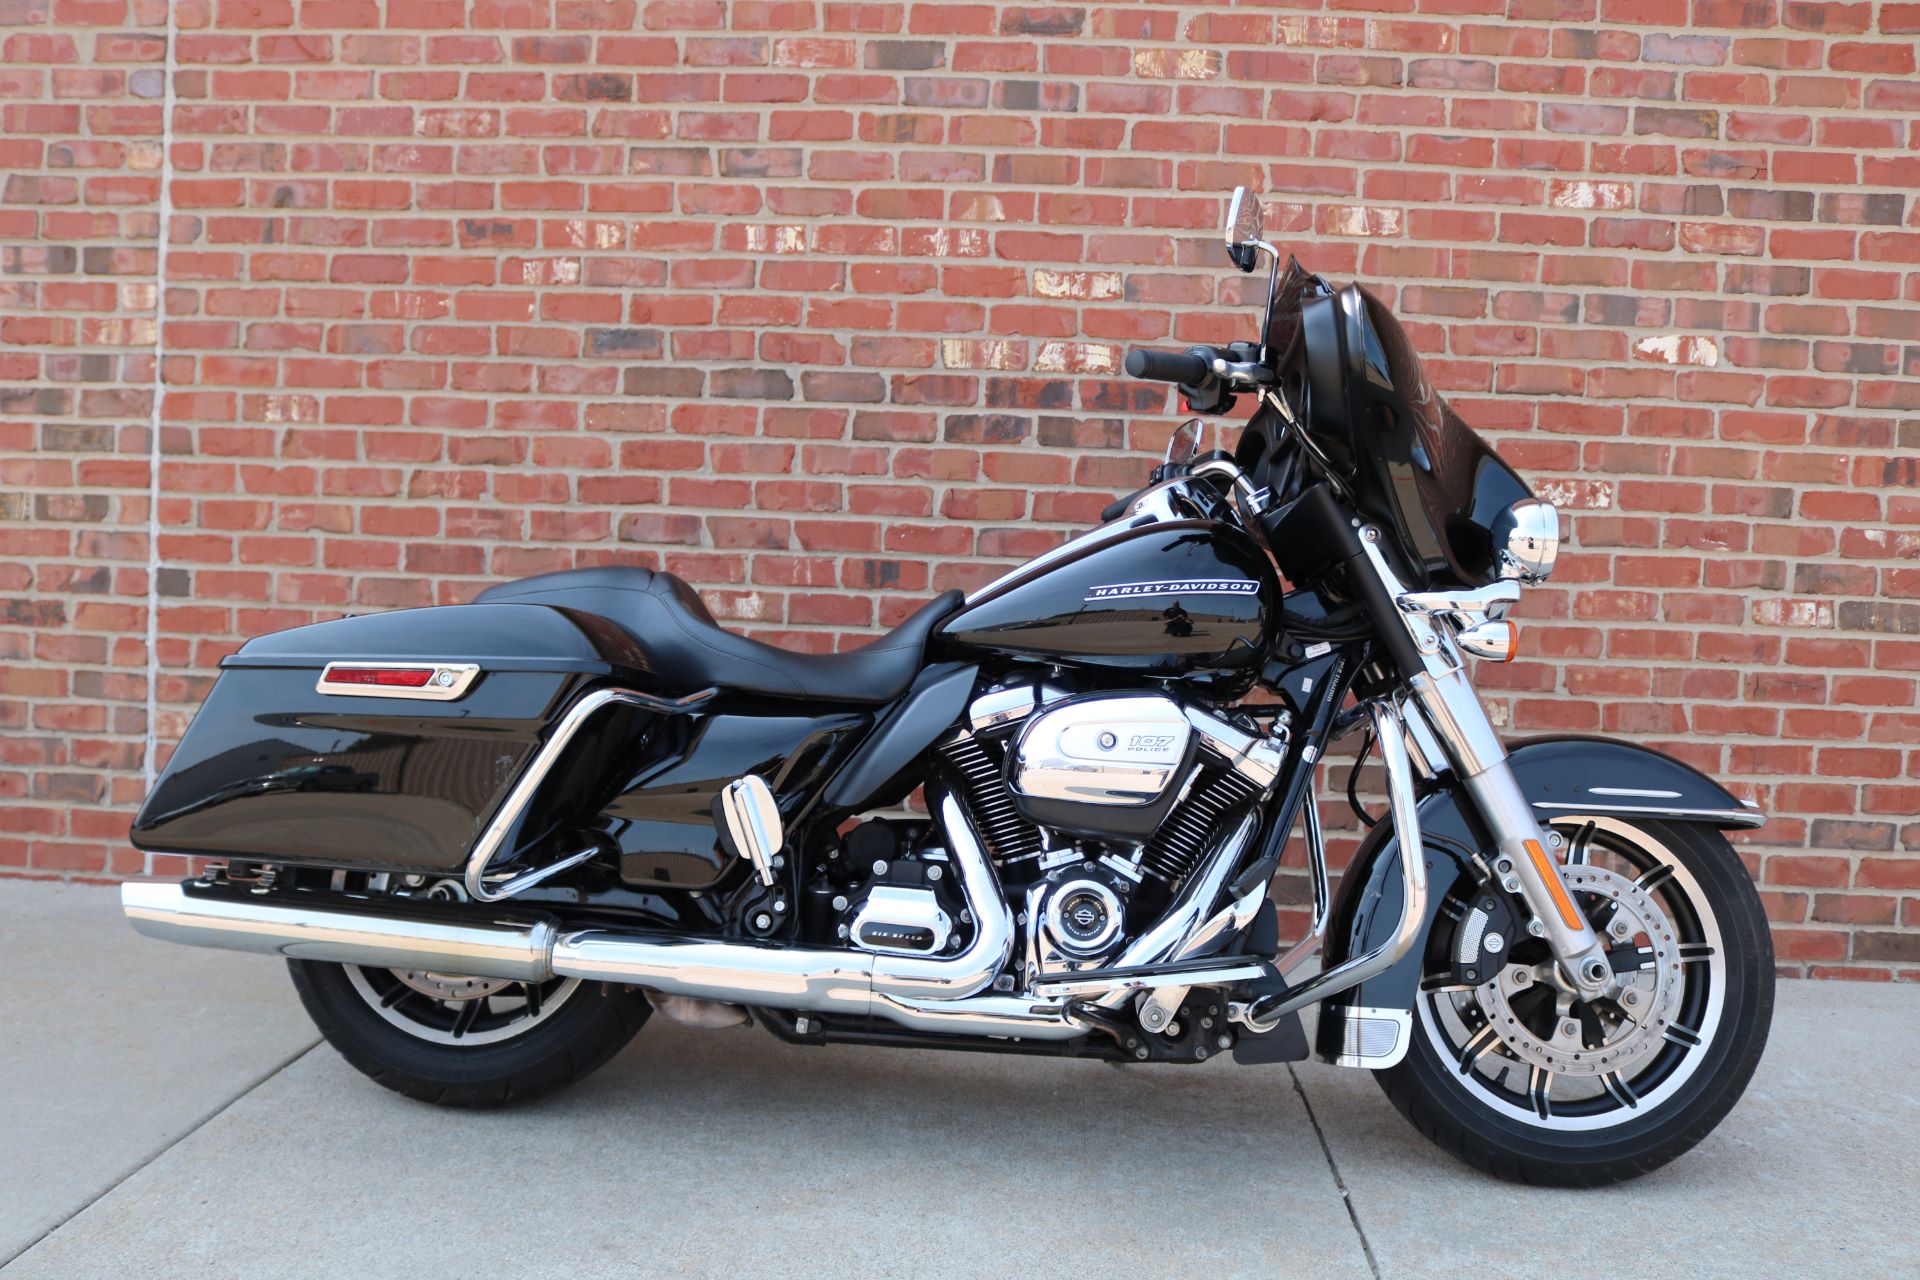 Used 2018 Harley Davidson Electra Glide Standard Police Motorcycles In Ames Ia Uhd615915 Black